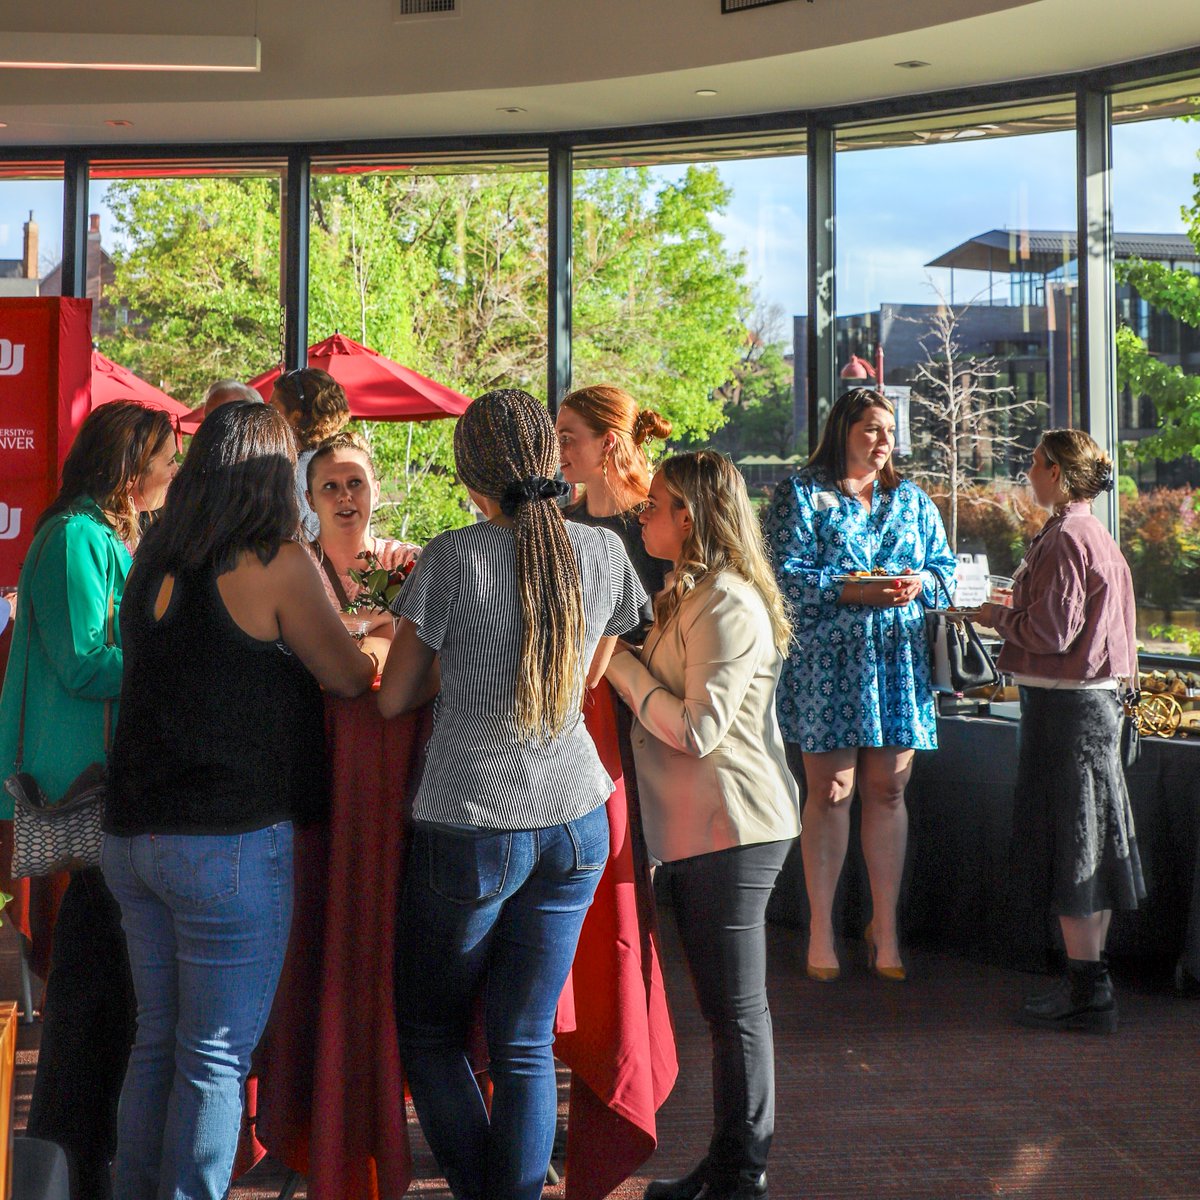 We had an incredible time celebrating our soon-to-be graduates during Senior Week! The festivities are just getting started as we gear up for Spring Commencement. Follow along as we continue to celebrate the #Classof2024 in the coming weeks! ❤️💛 #DUGrad24 | #UniversityofDenver